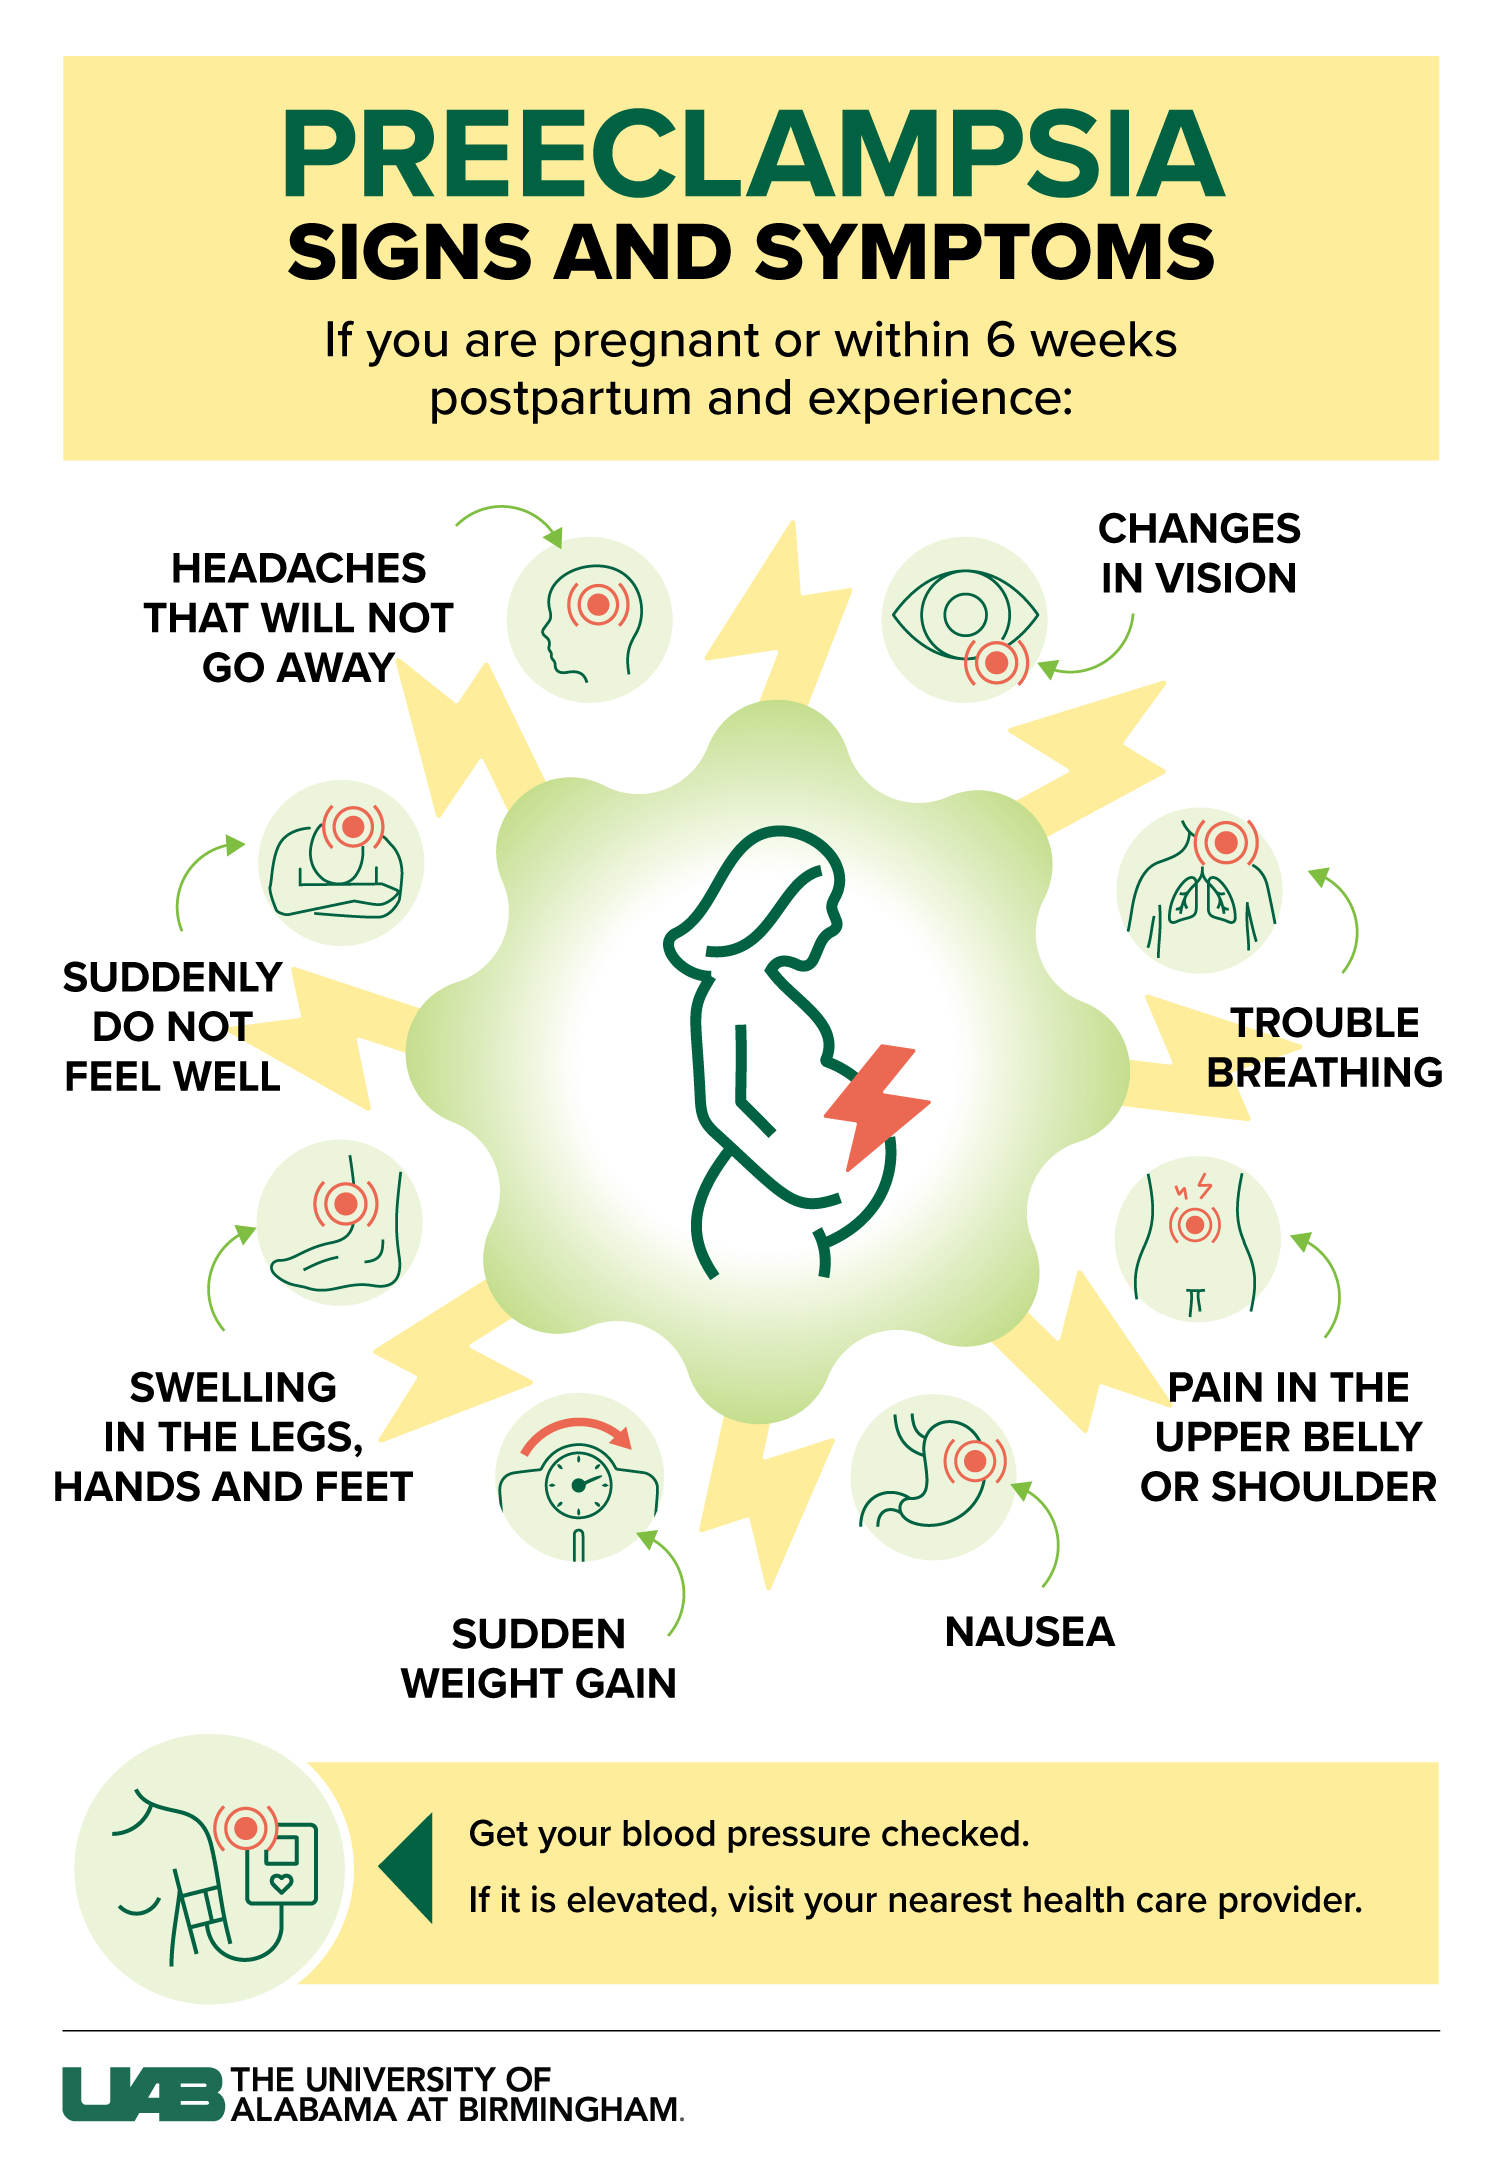 Preeclampsia signs and symptoms graphic